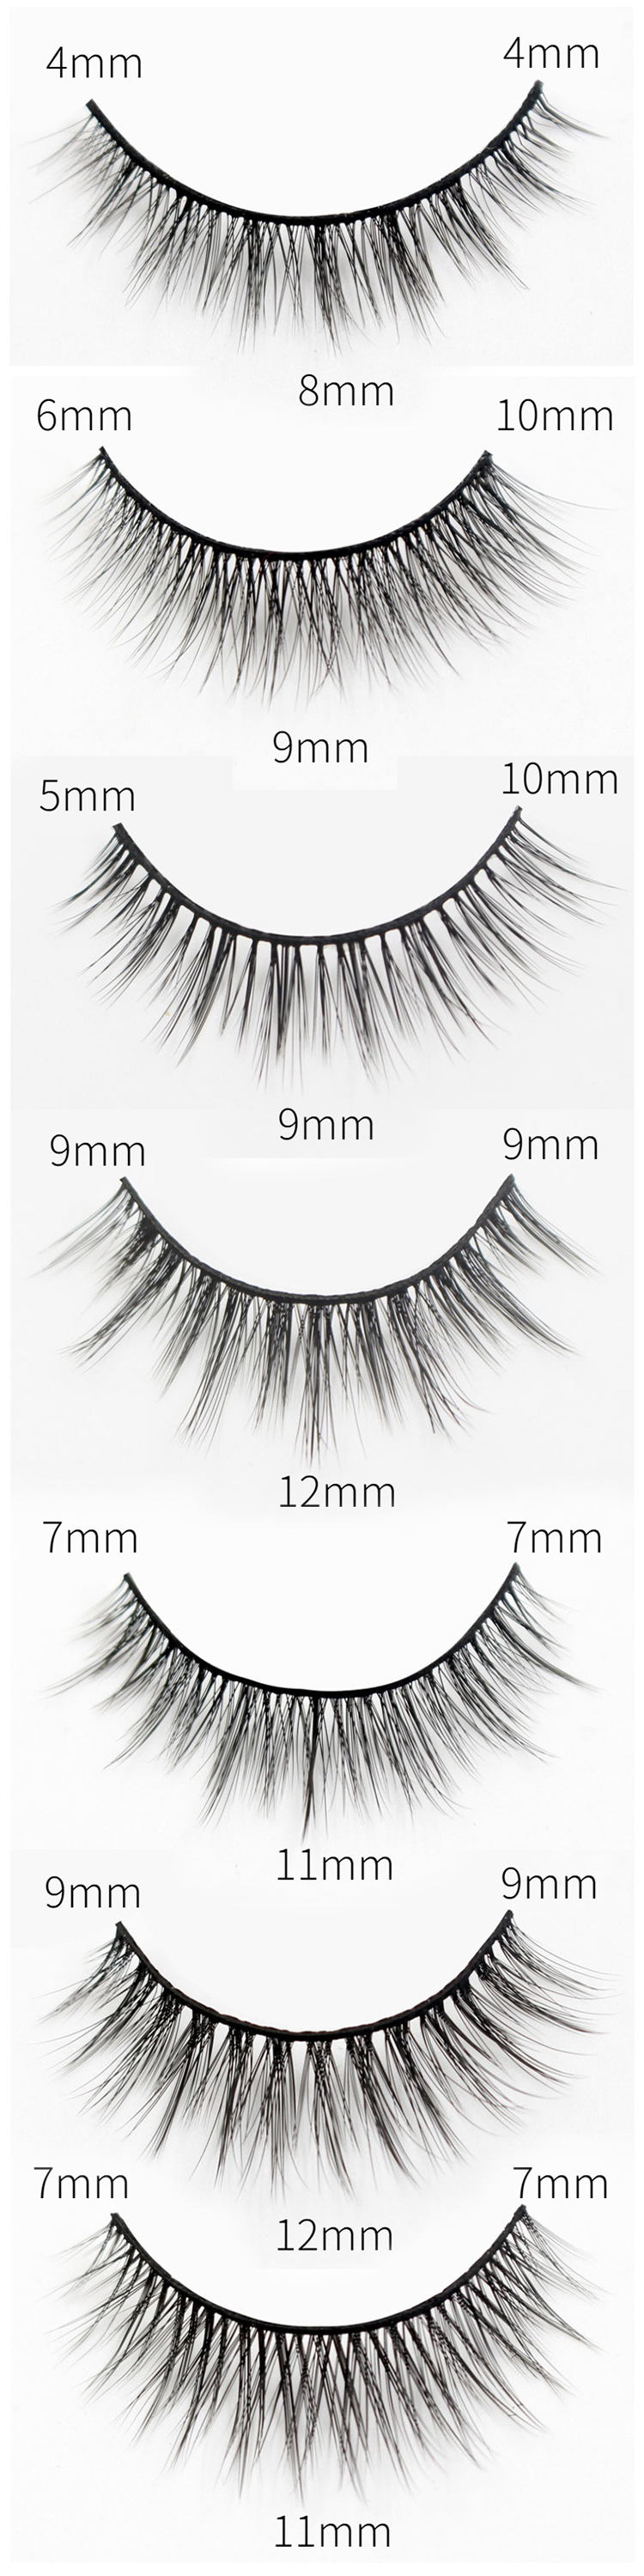 different-magnetic-lashes-styles-own-brand.jpg